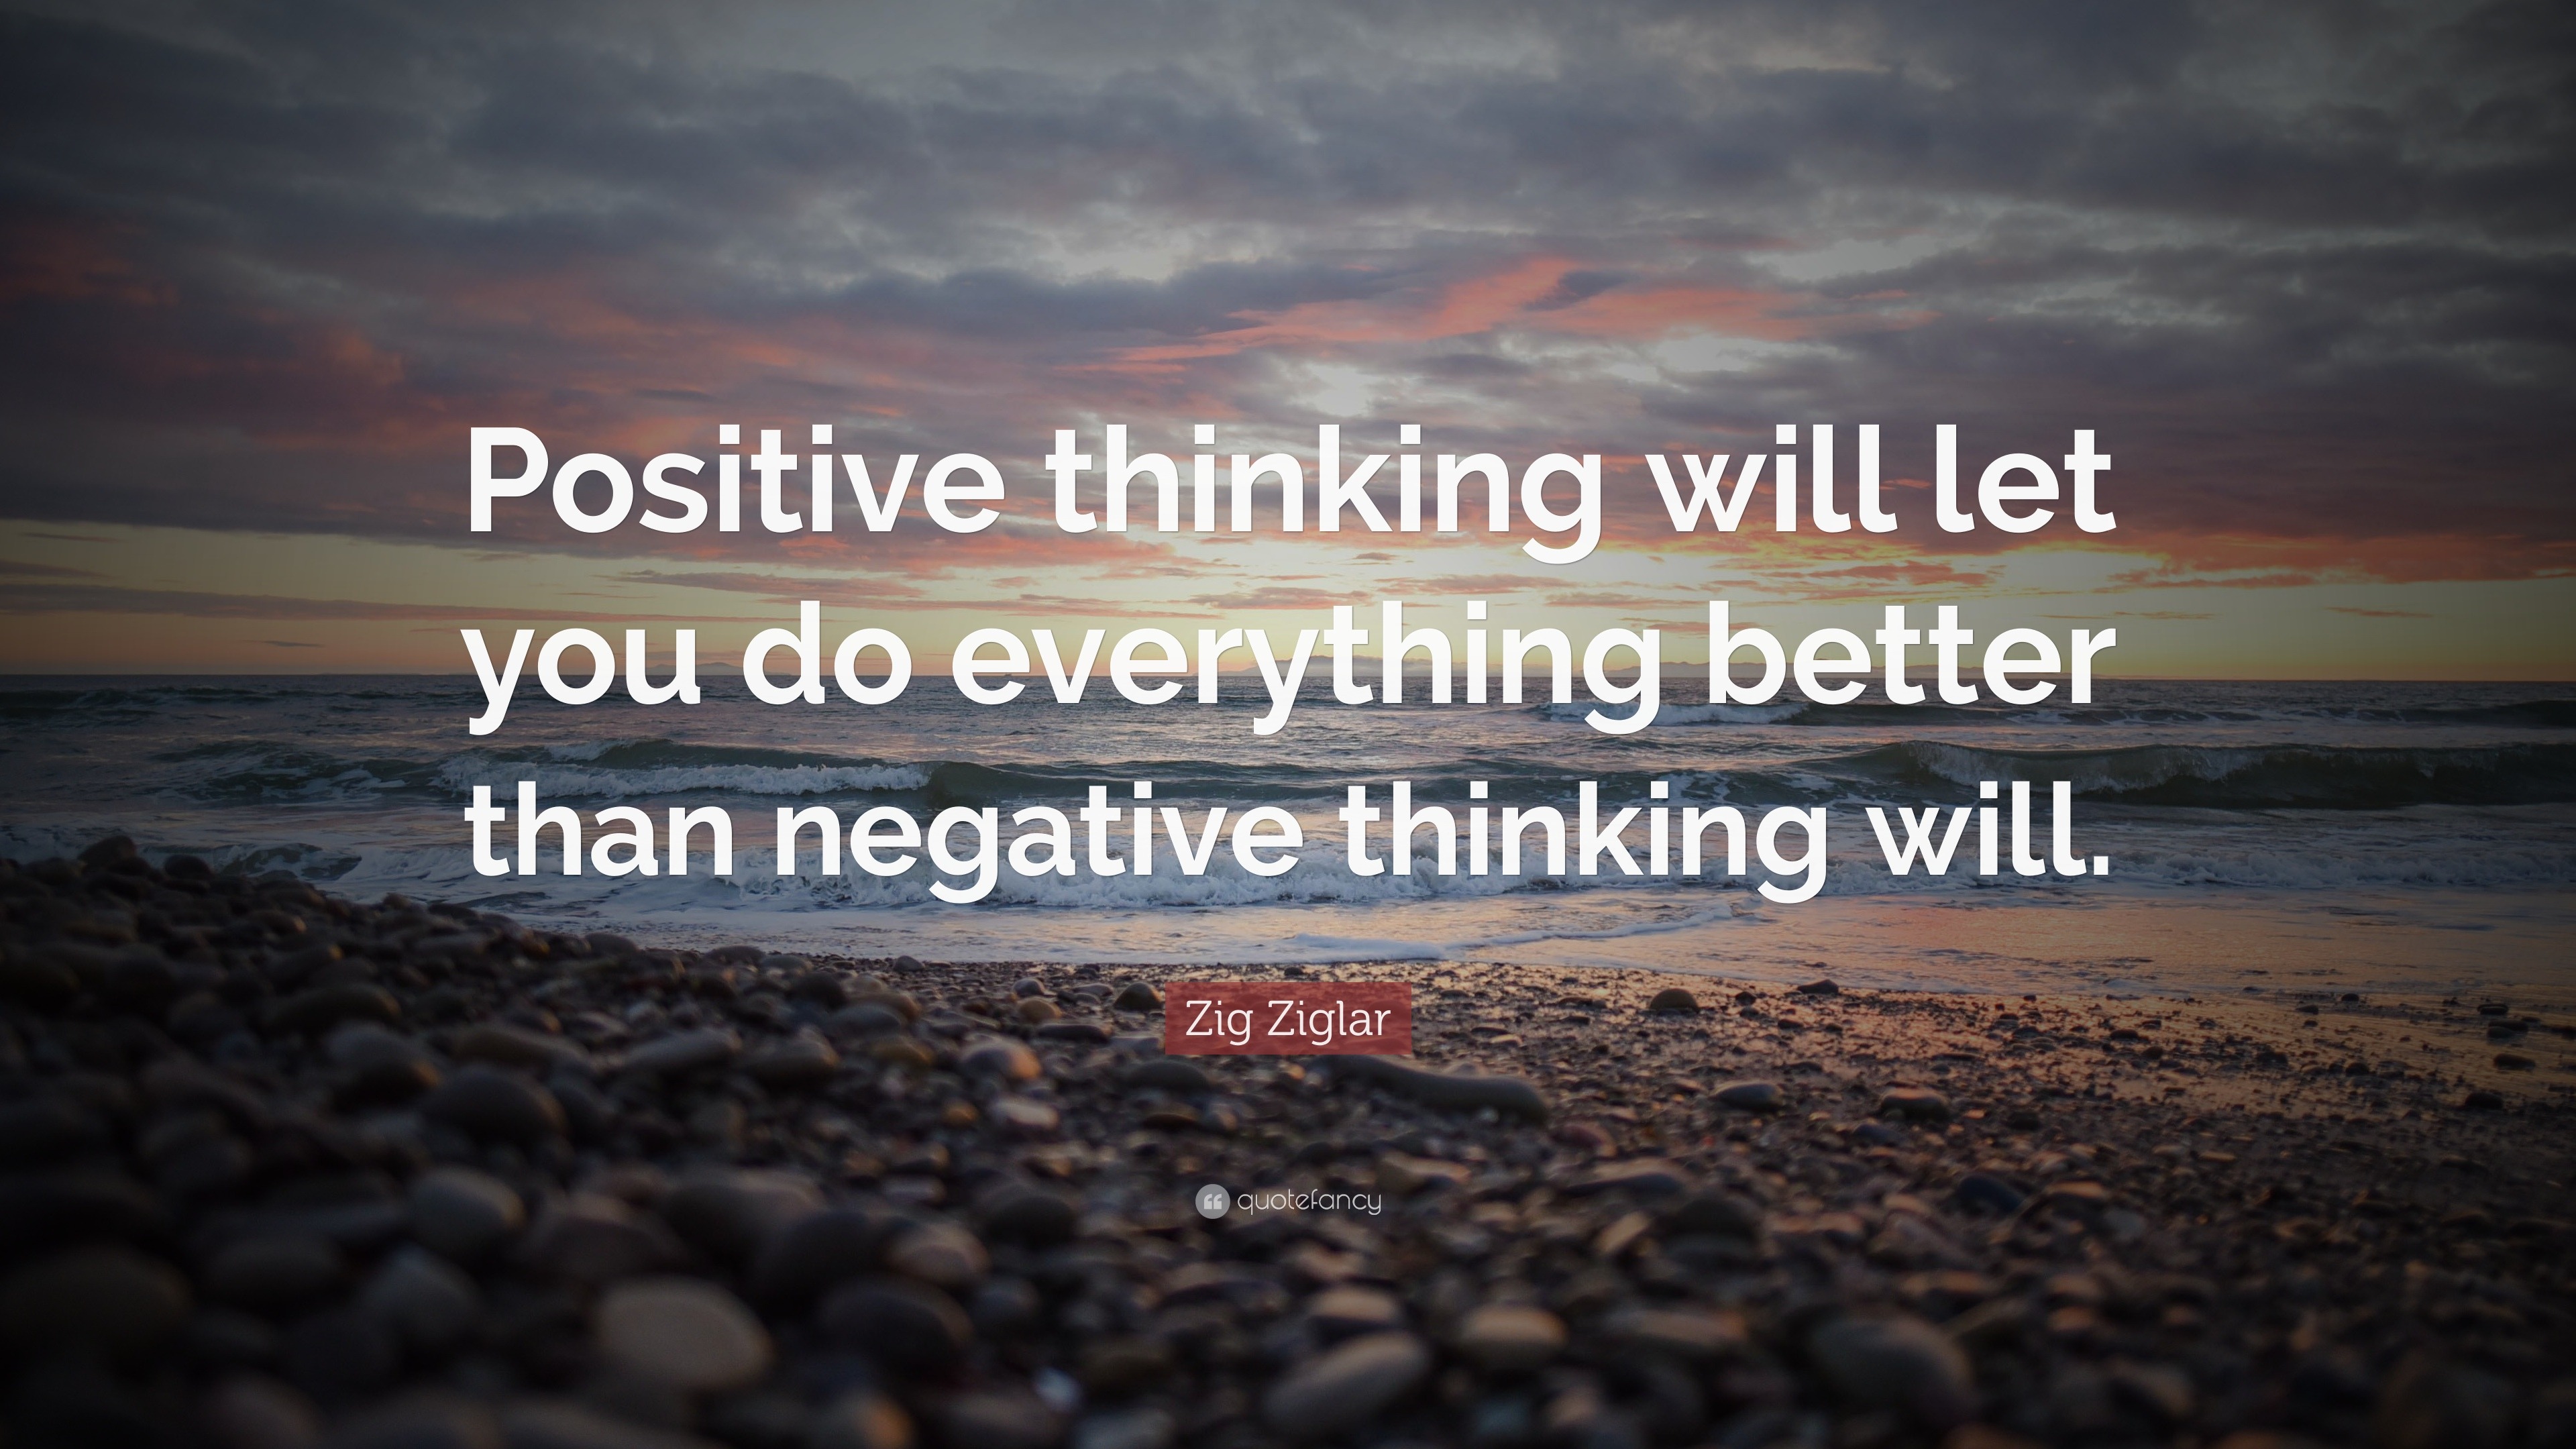 Zig Ziglar Quote: “Positive thinking will let you do everything better